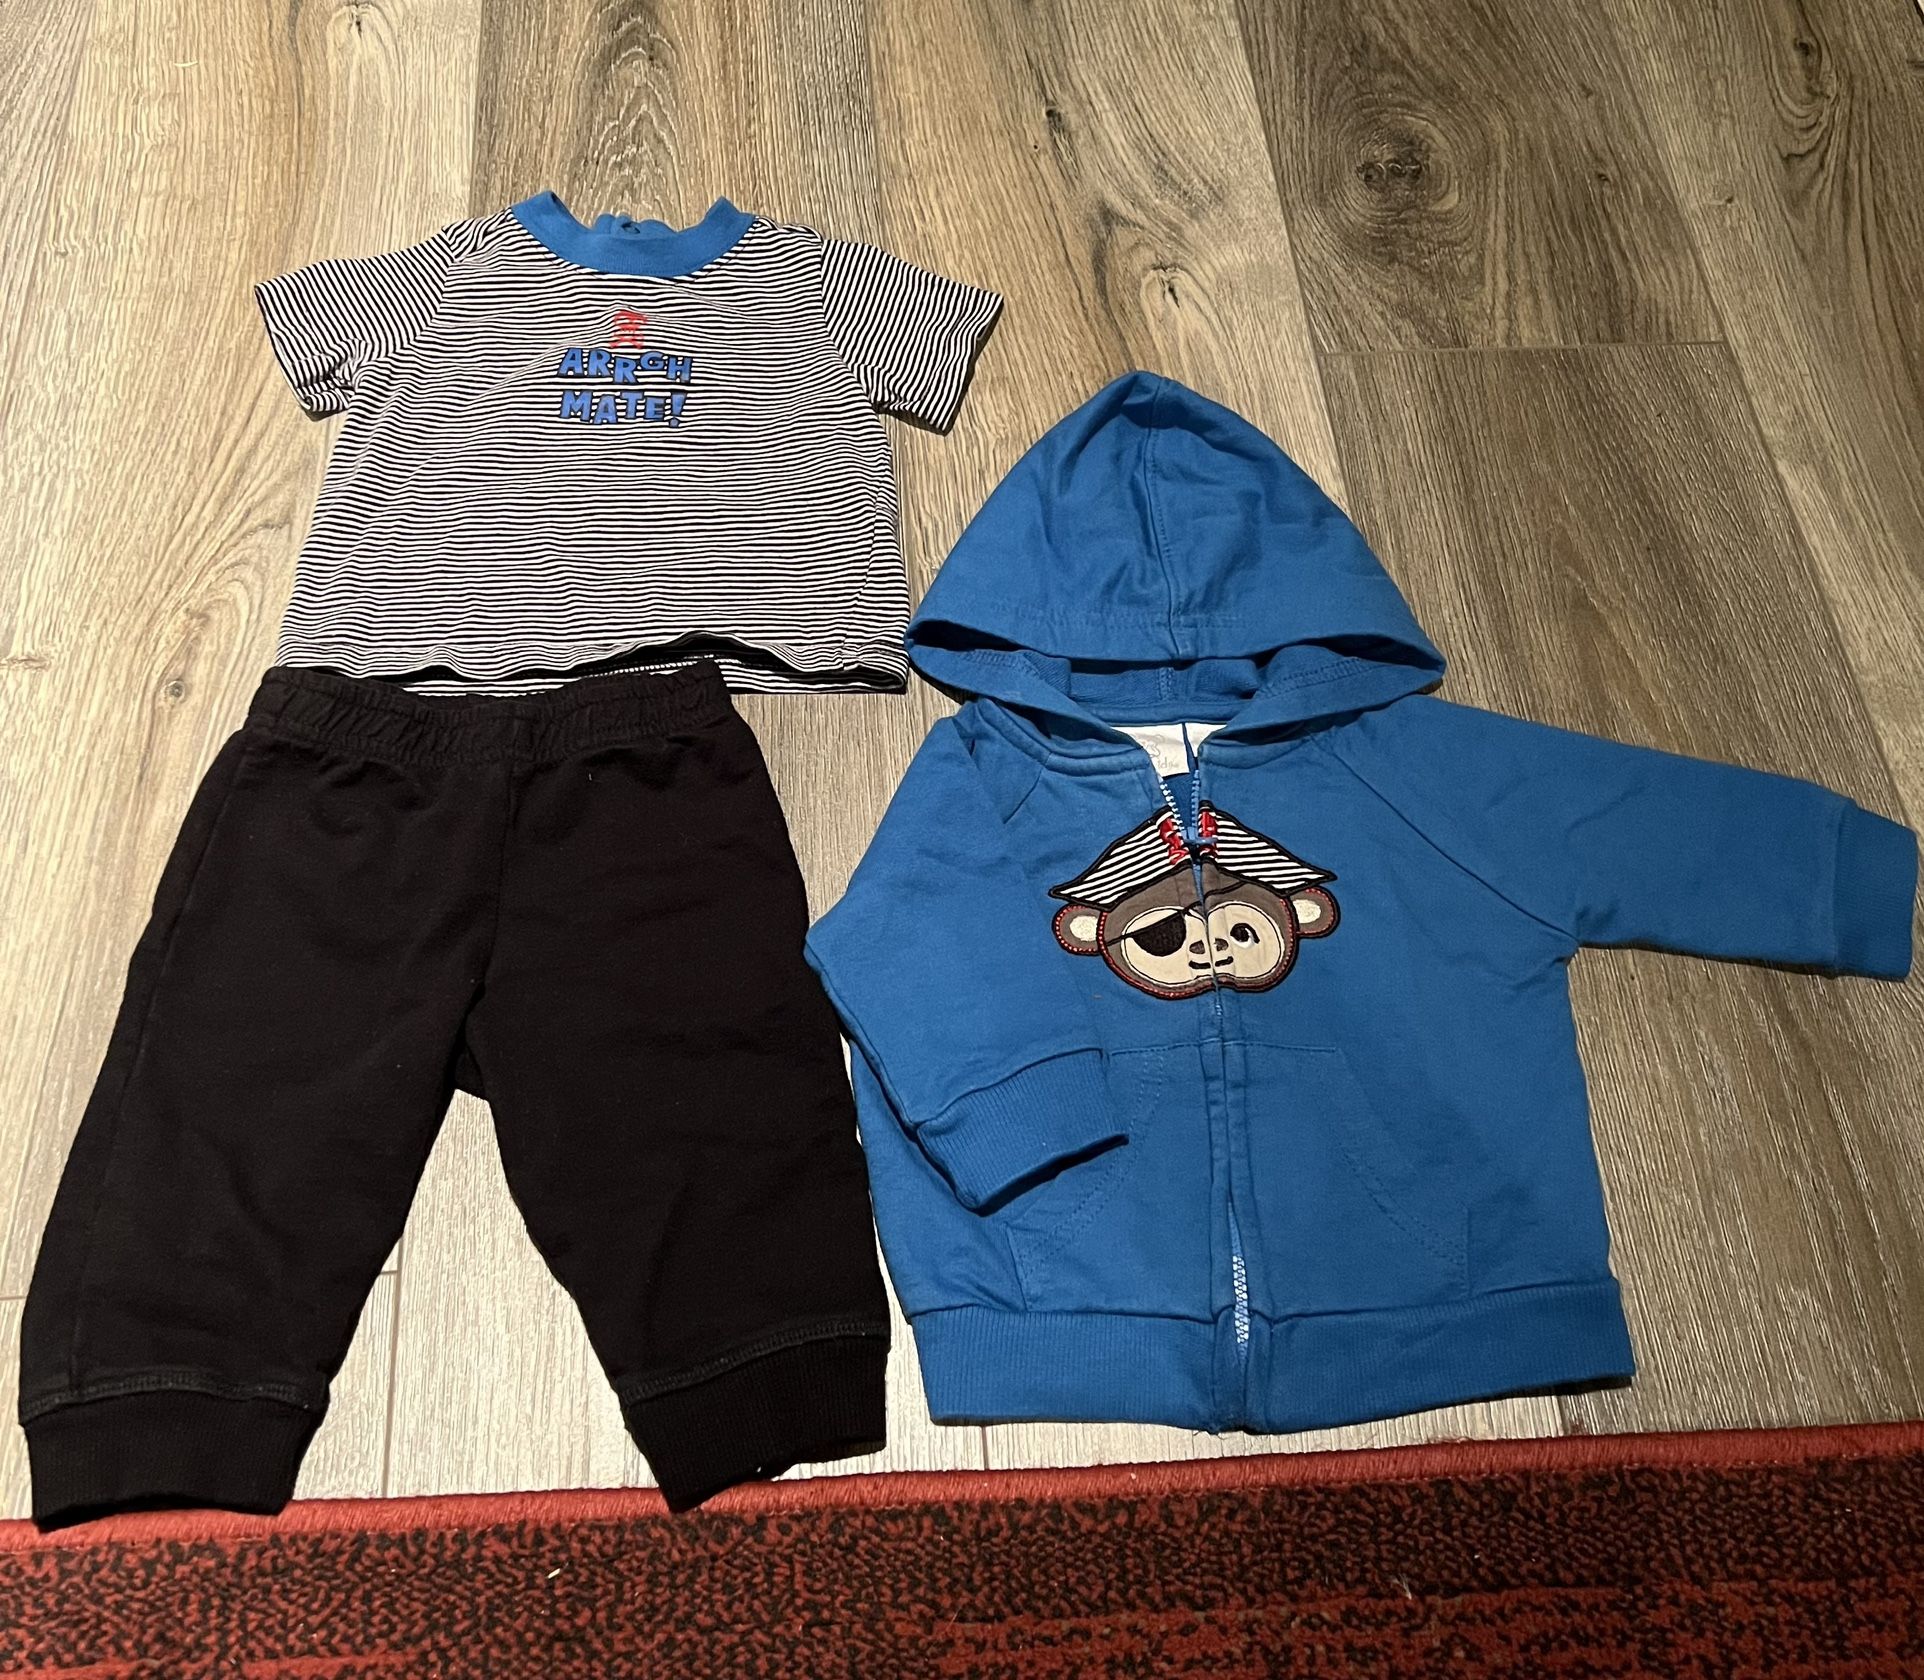 Baby Boy Clothes (Give Me Your Best Offers)